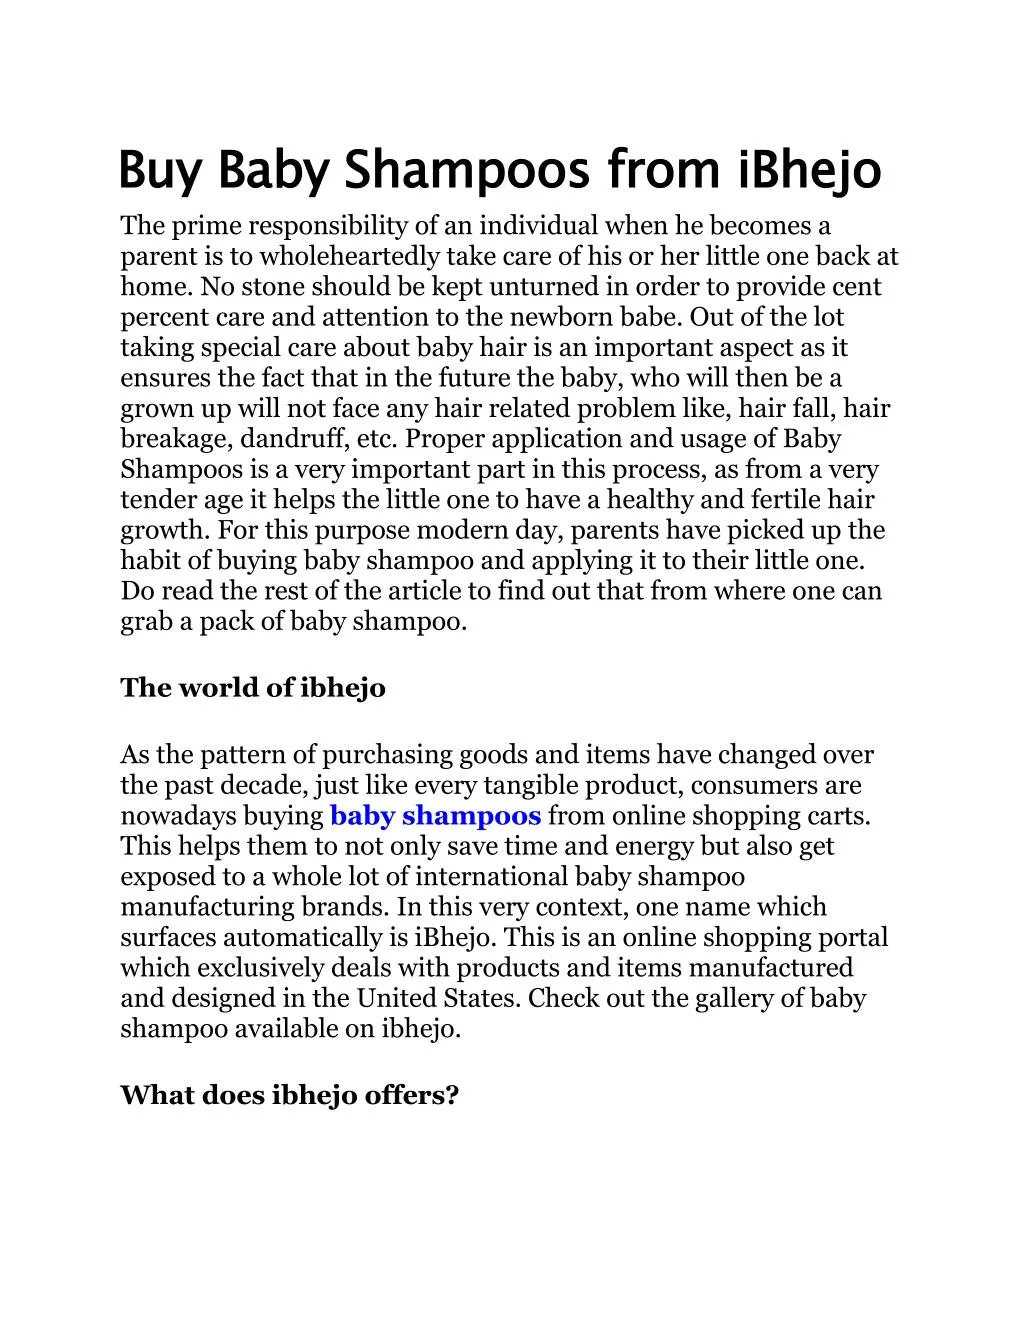 buy baby shampoos from the prime responsibility